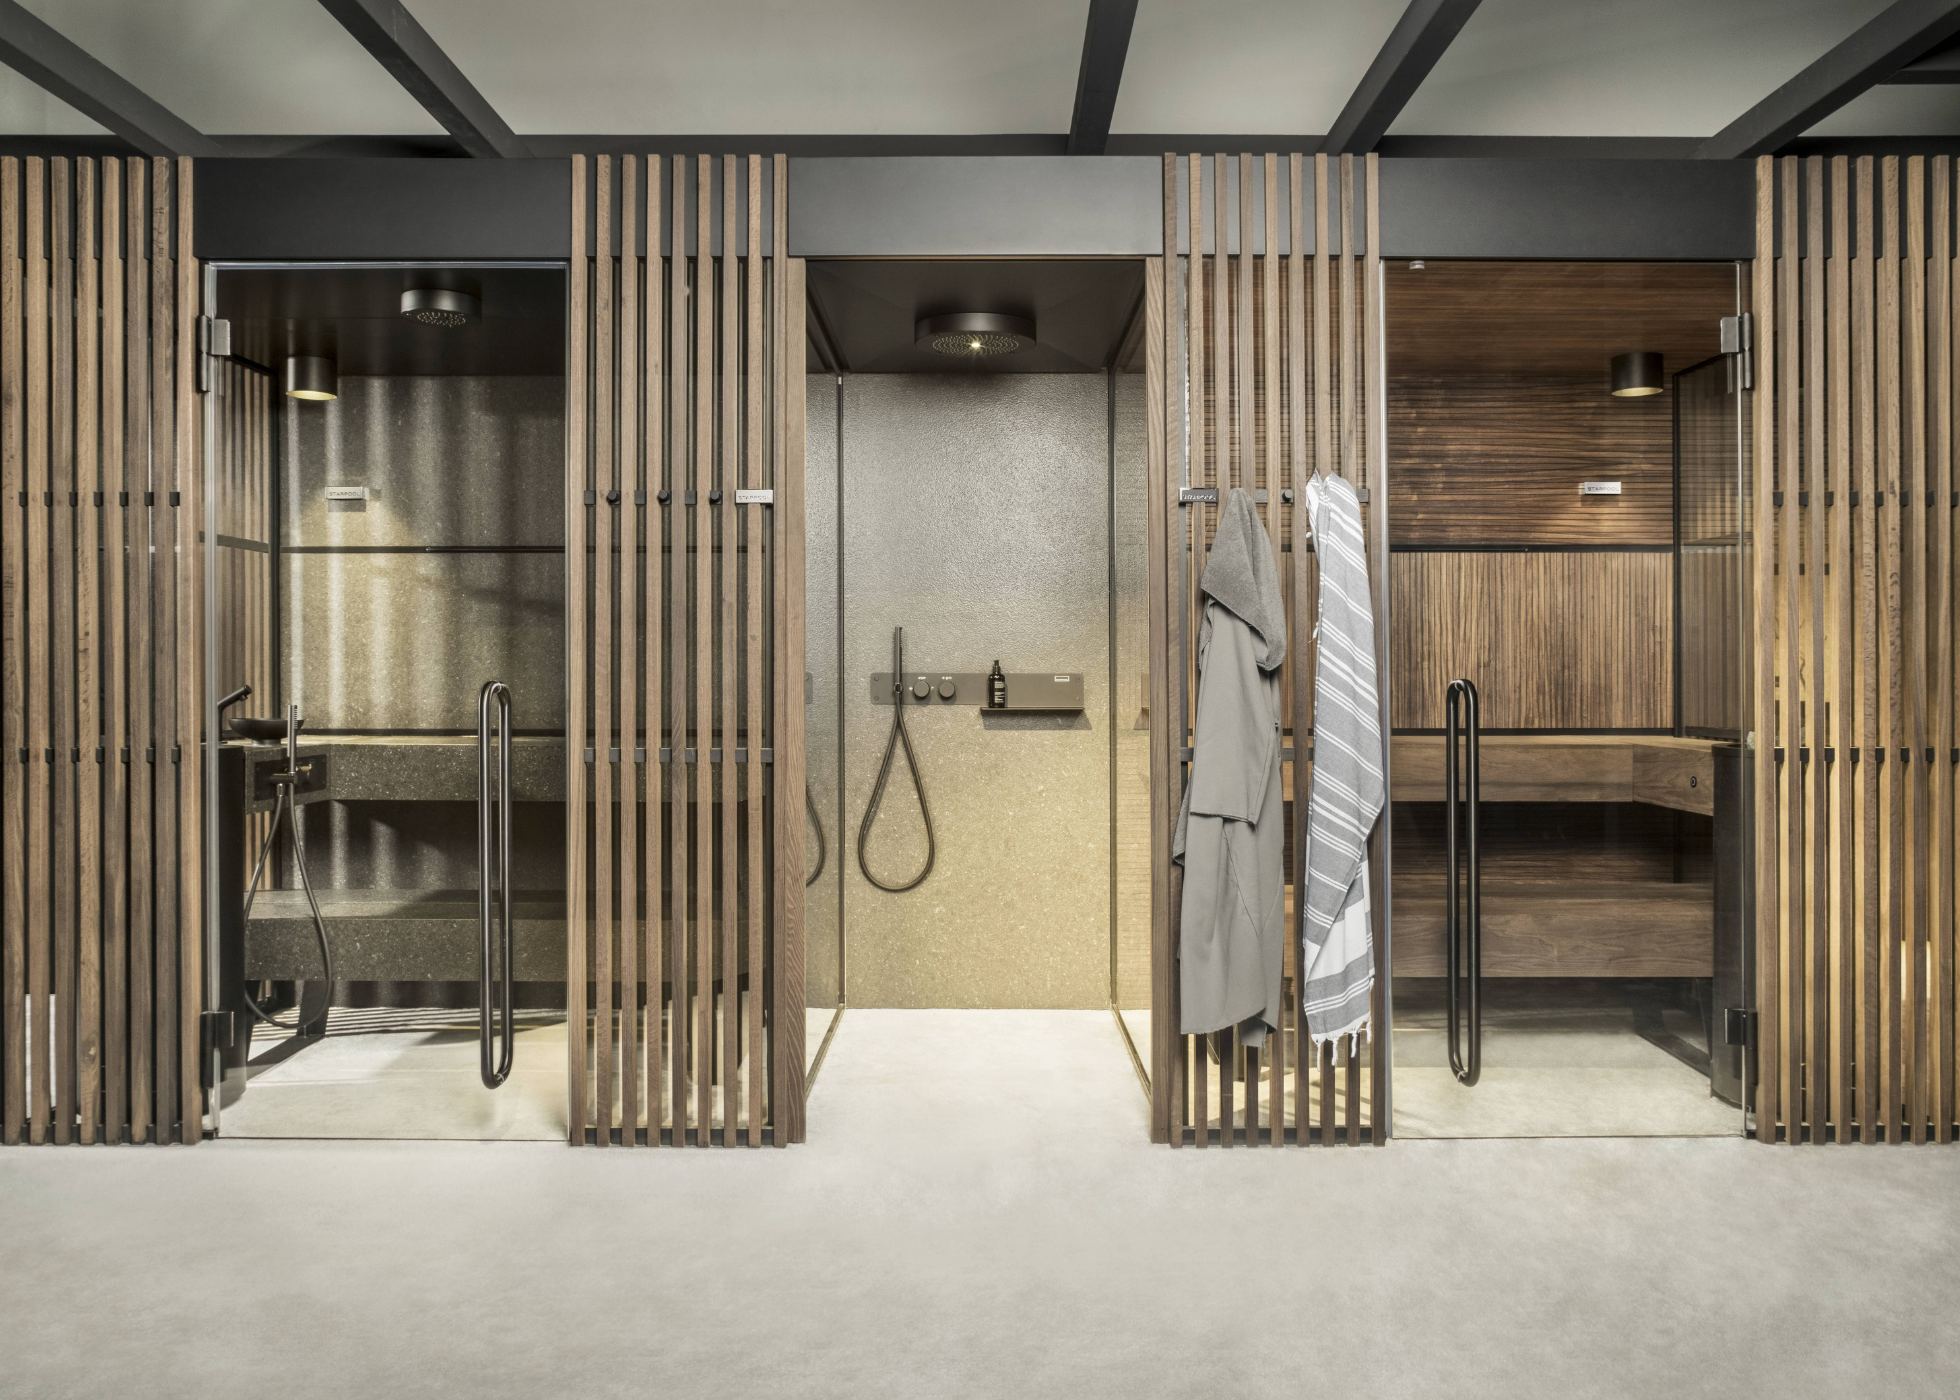 Shade Collection, the Starpool solution for private wellness at home with Finnish sauna, steam room and shower